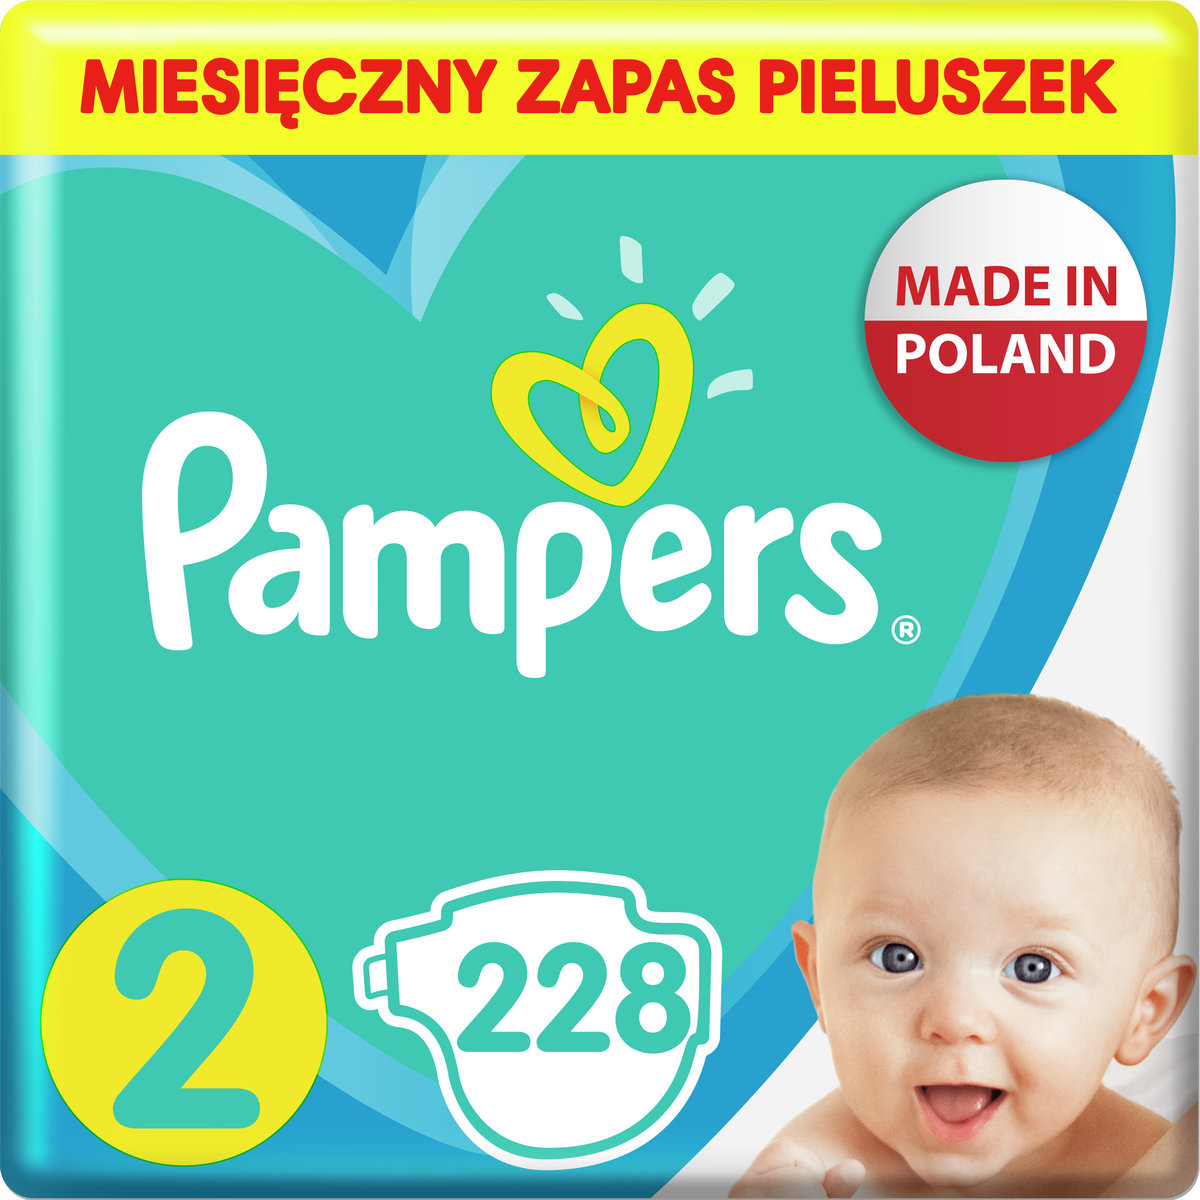 pampers 1 site ceneo.pl